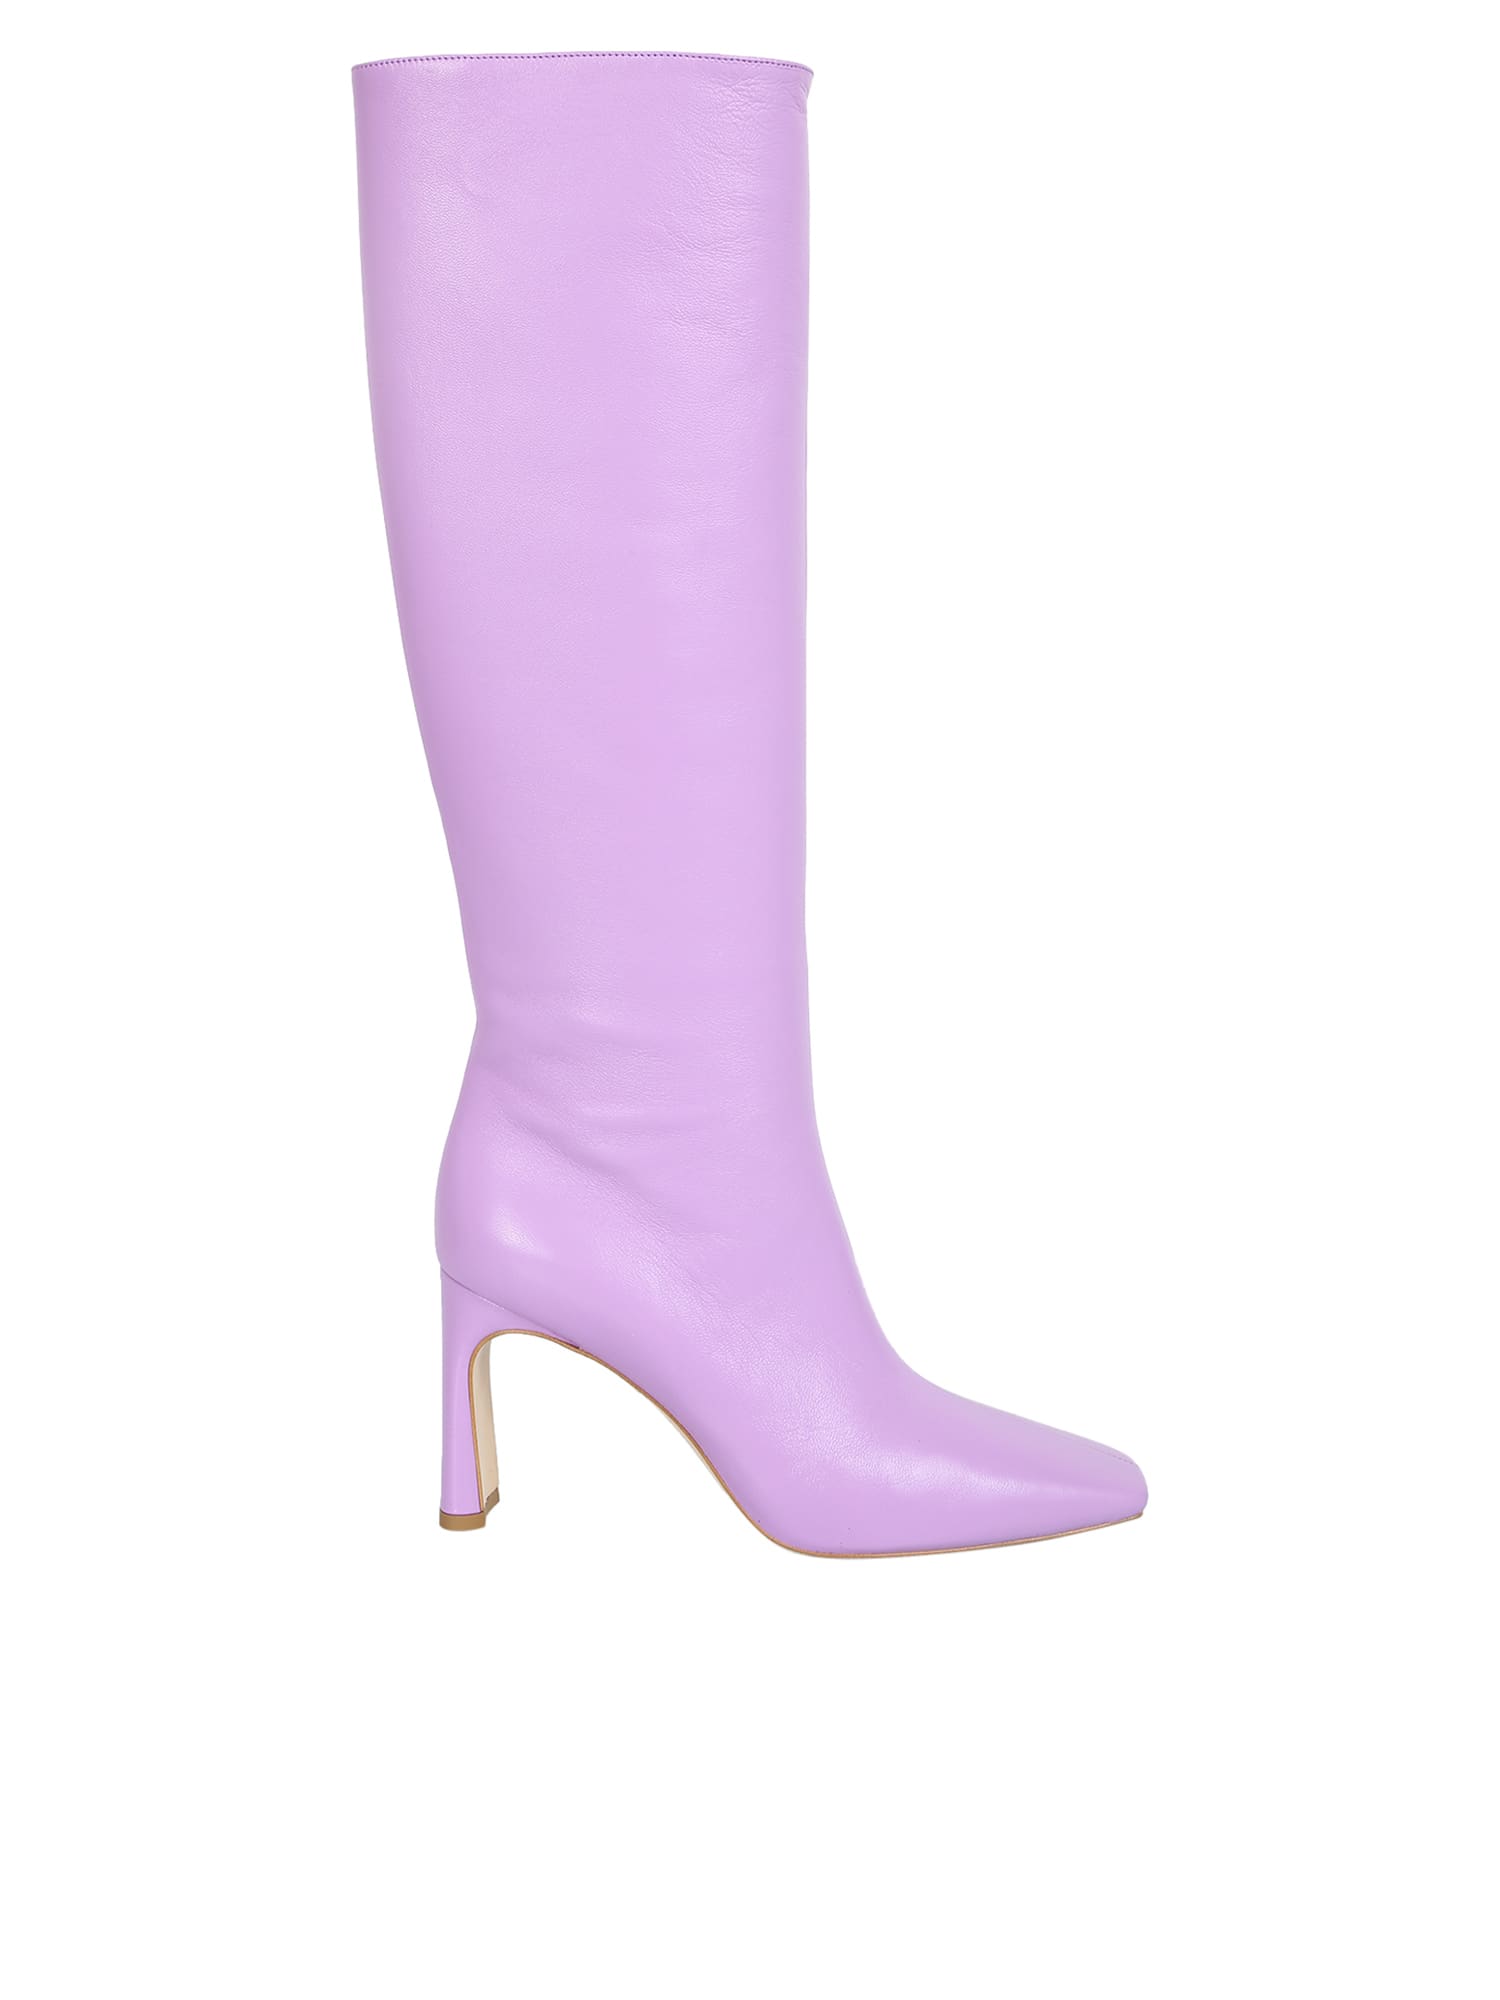 Leonie Hanne Leather Heeled Boots In Purple